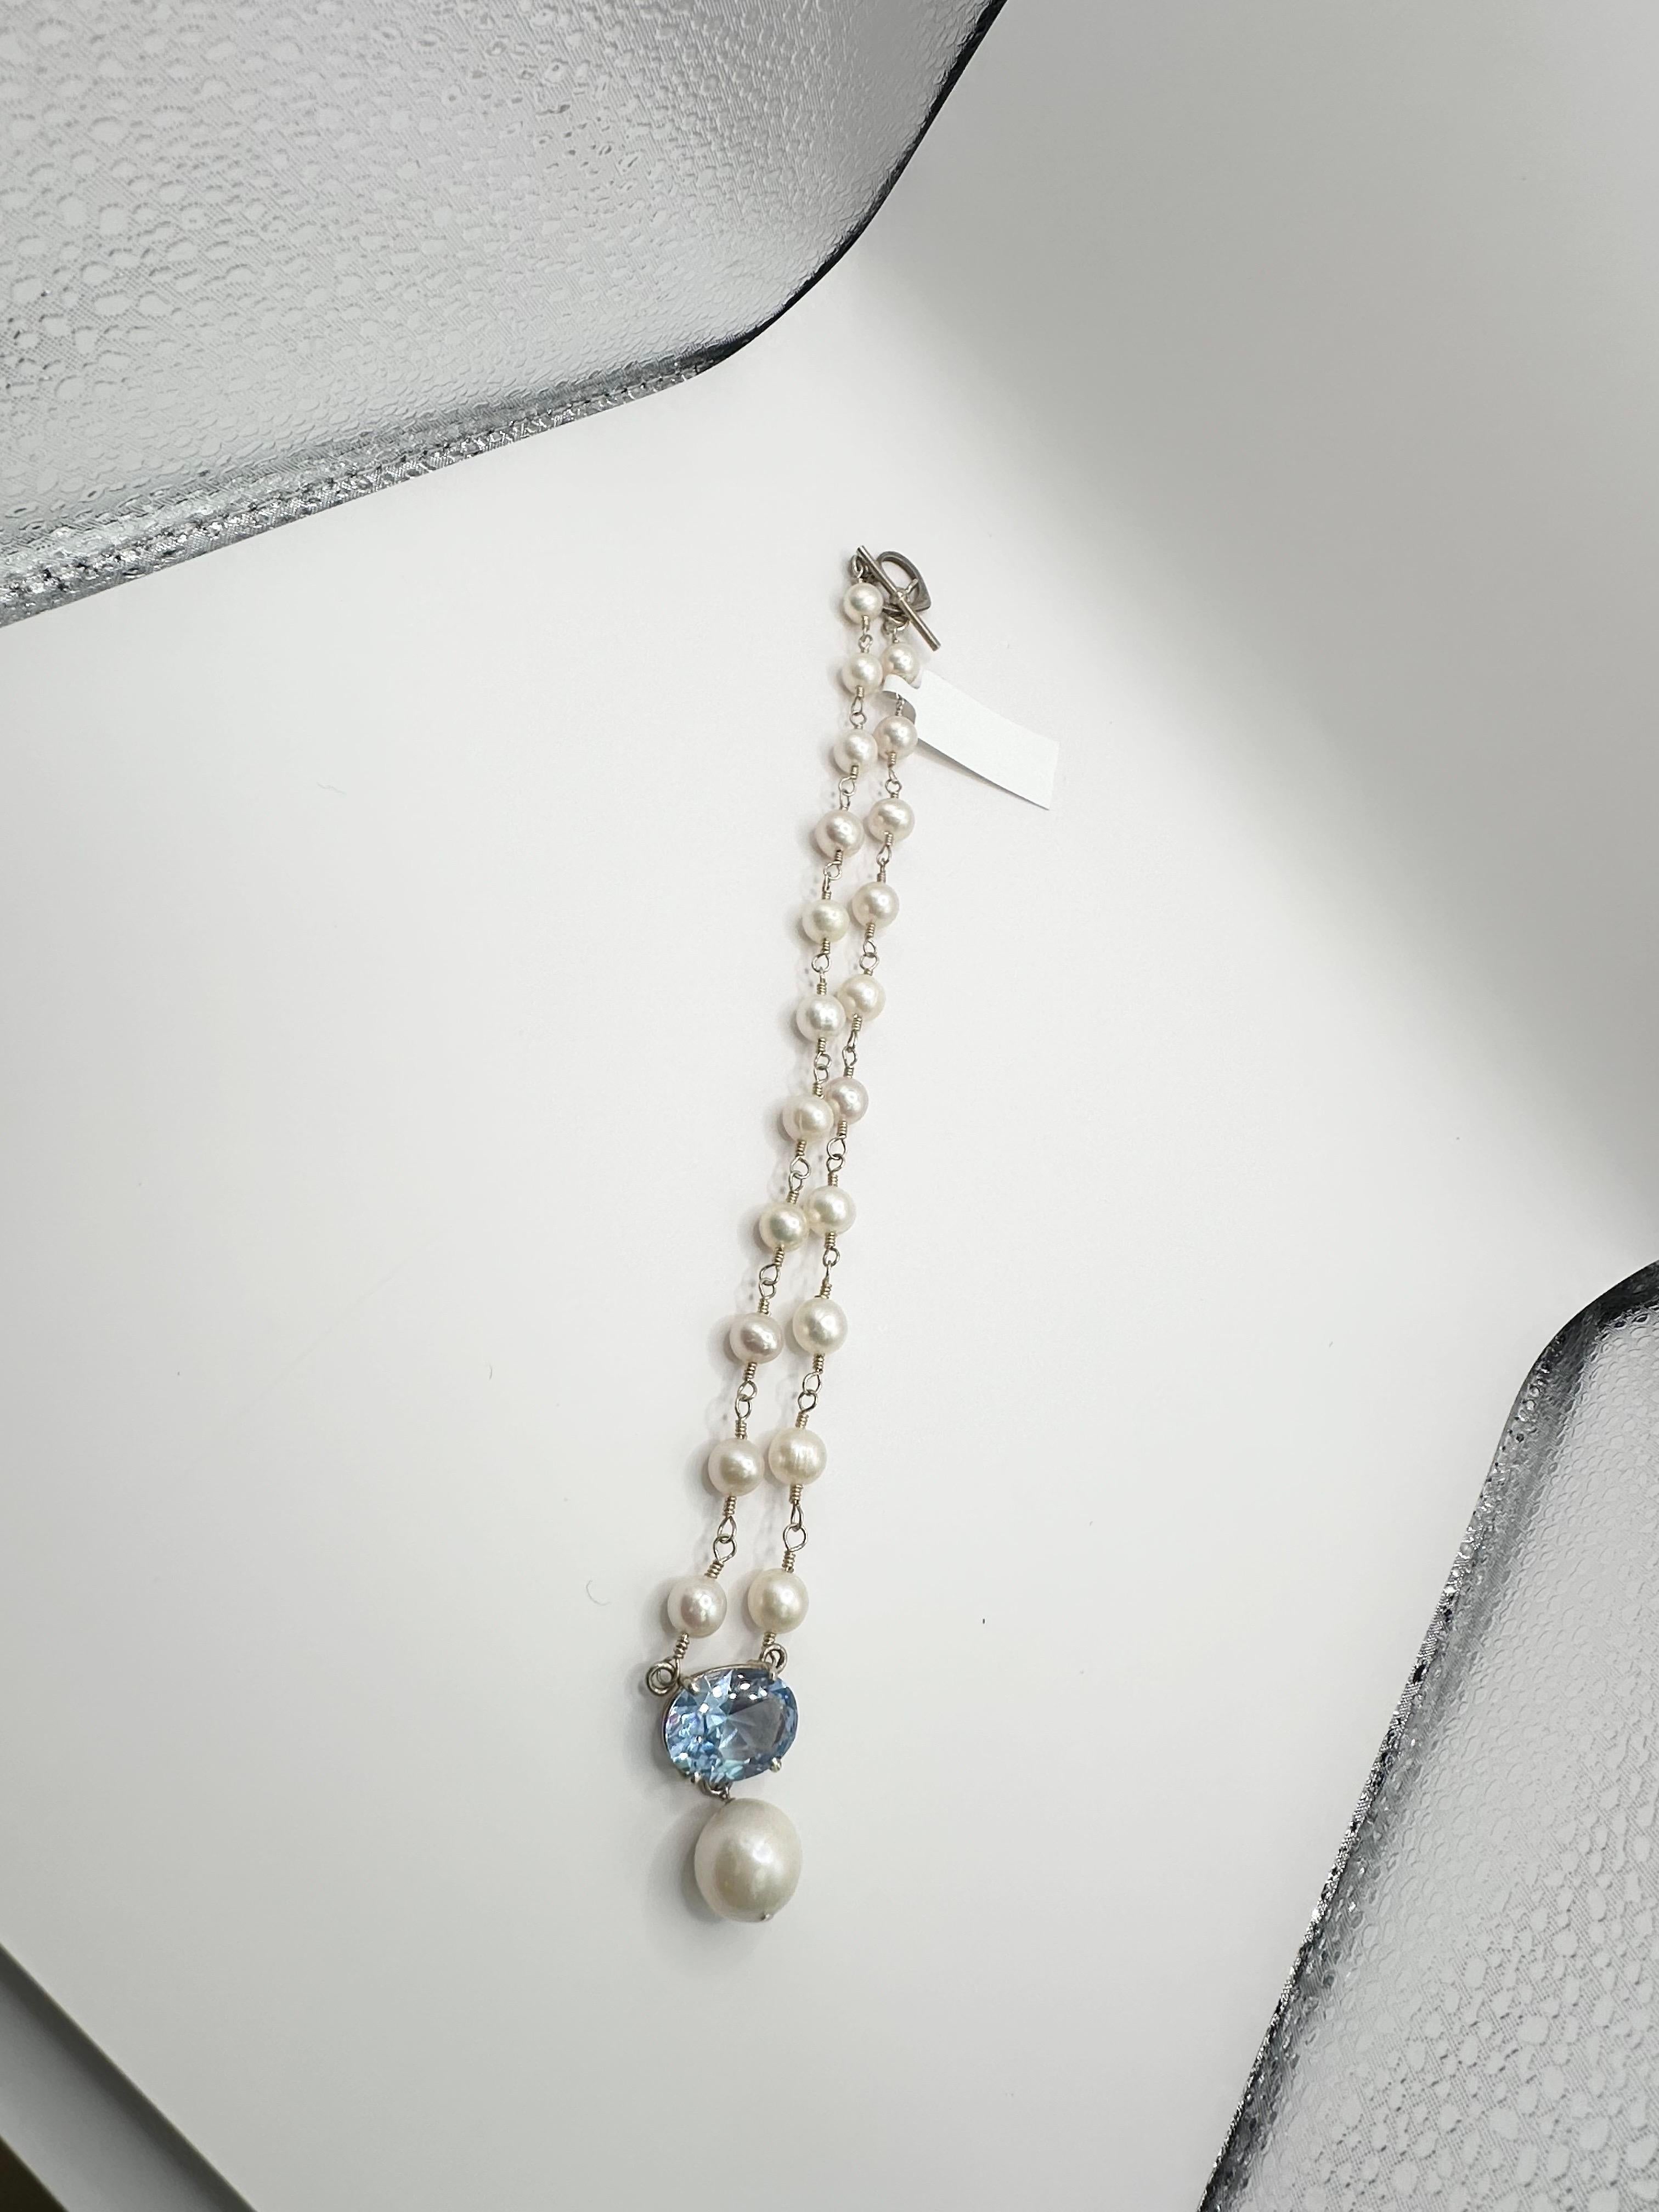 Pretty pearl and blue topaz necklace in sterling silver, 18